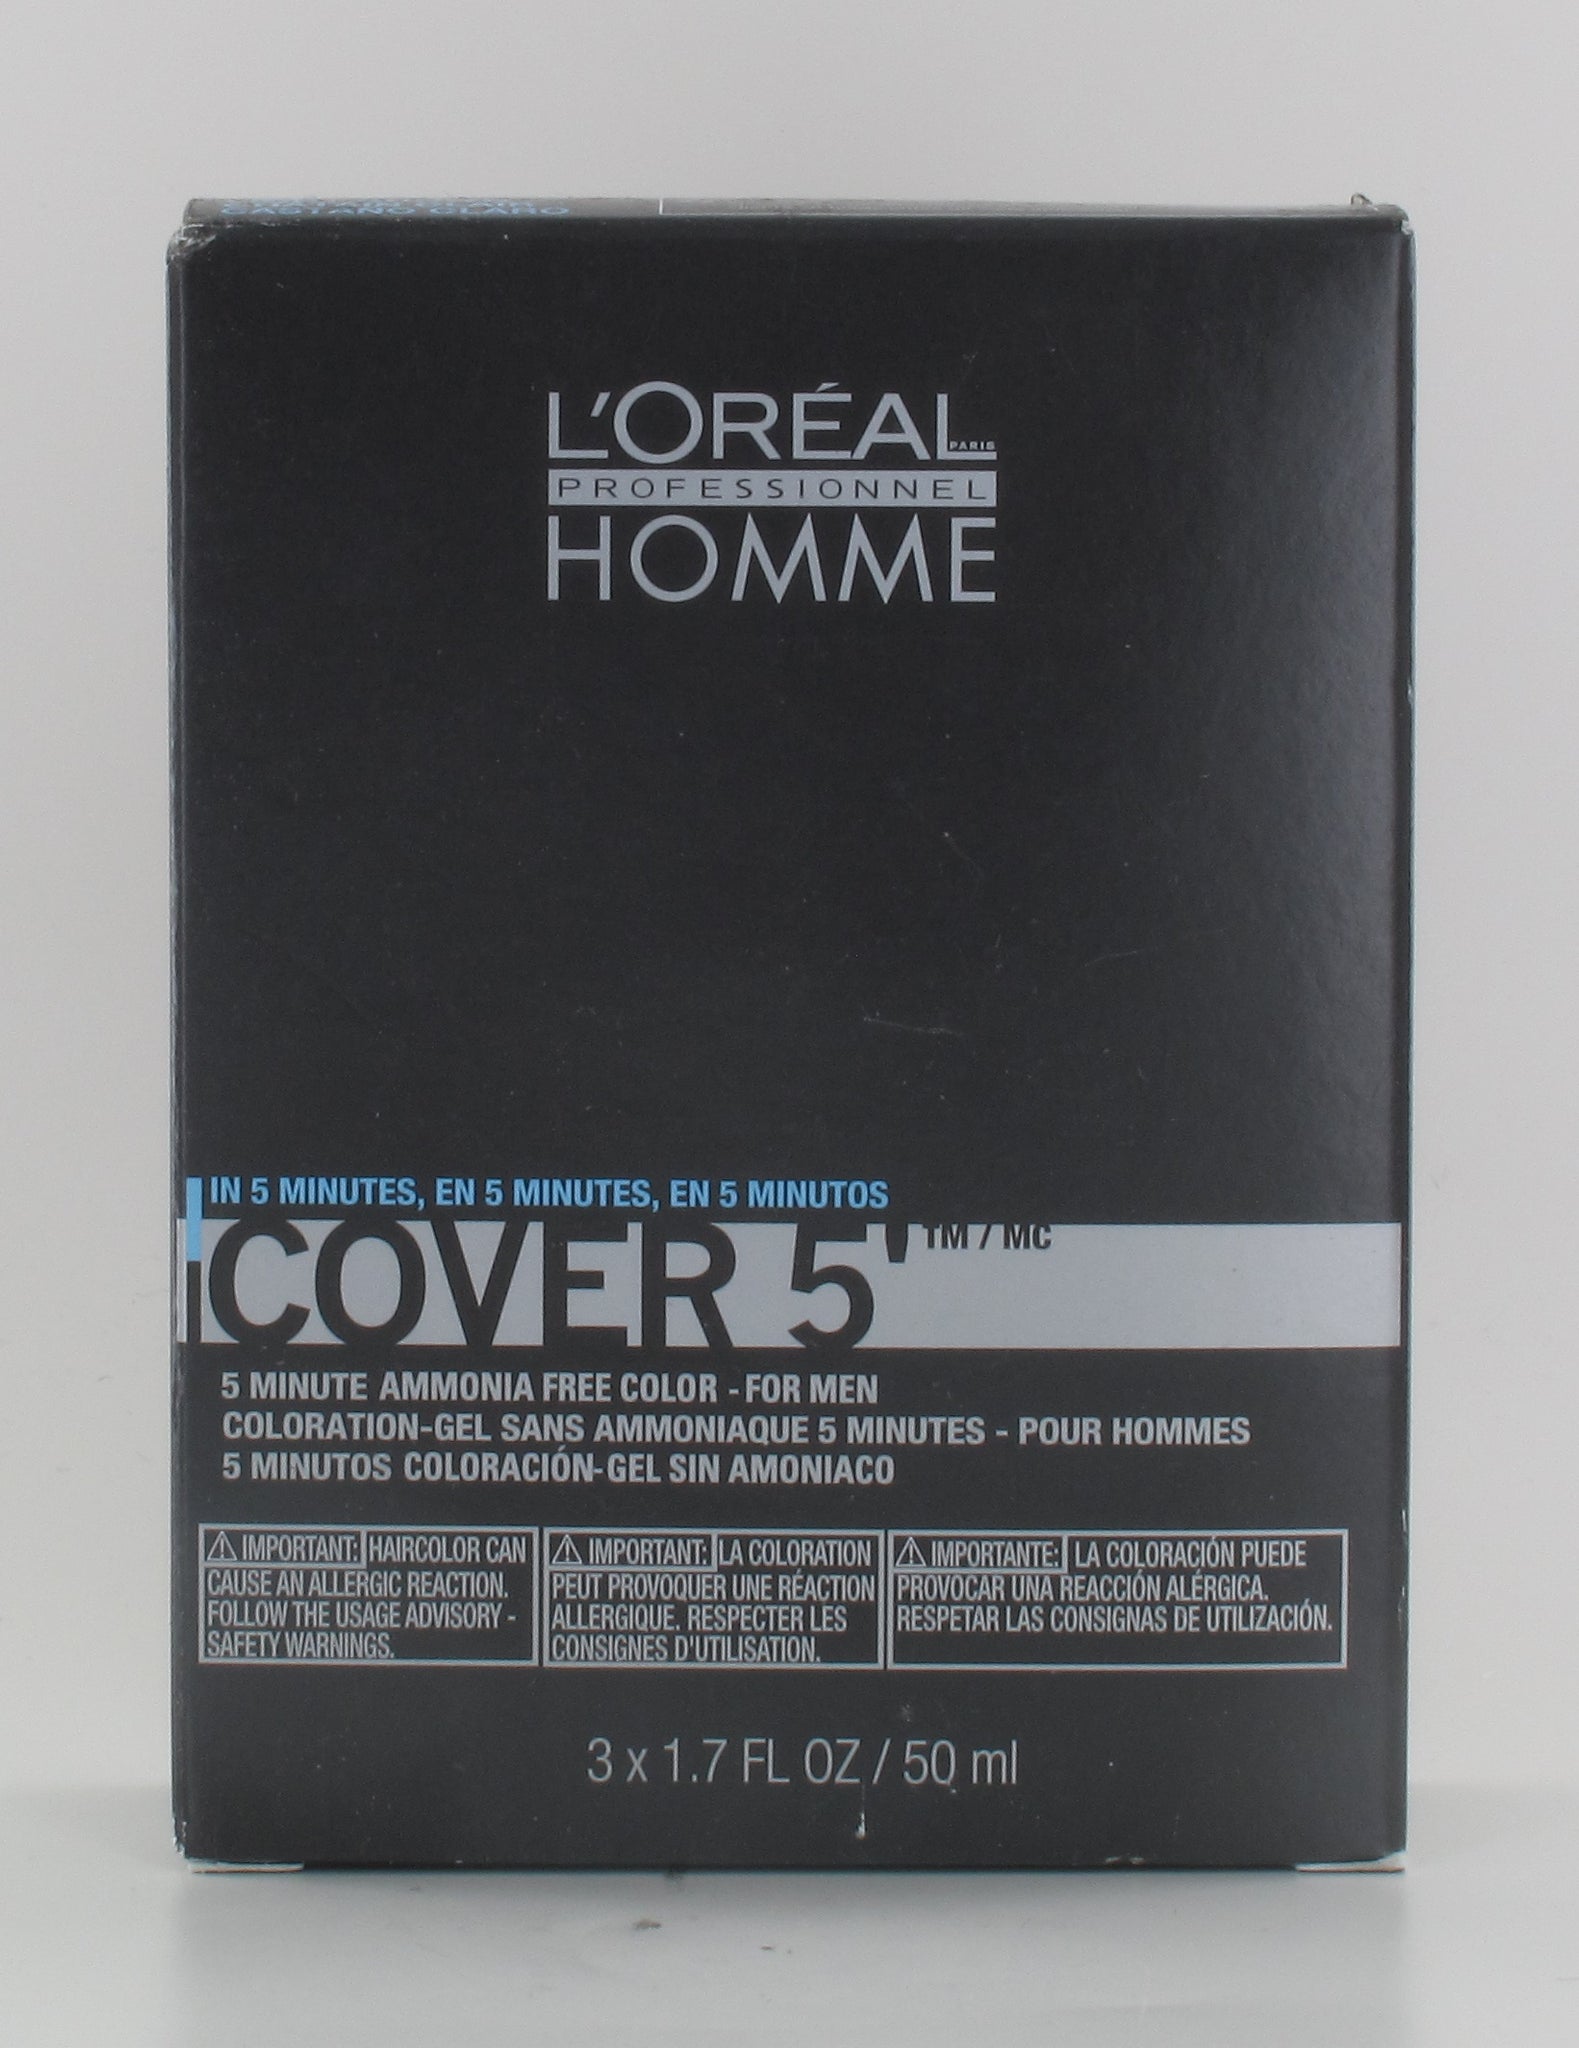 LOREAL Homme Cover 5 Light Brown #6 For Men 1.7 oz (pack of 3)